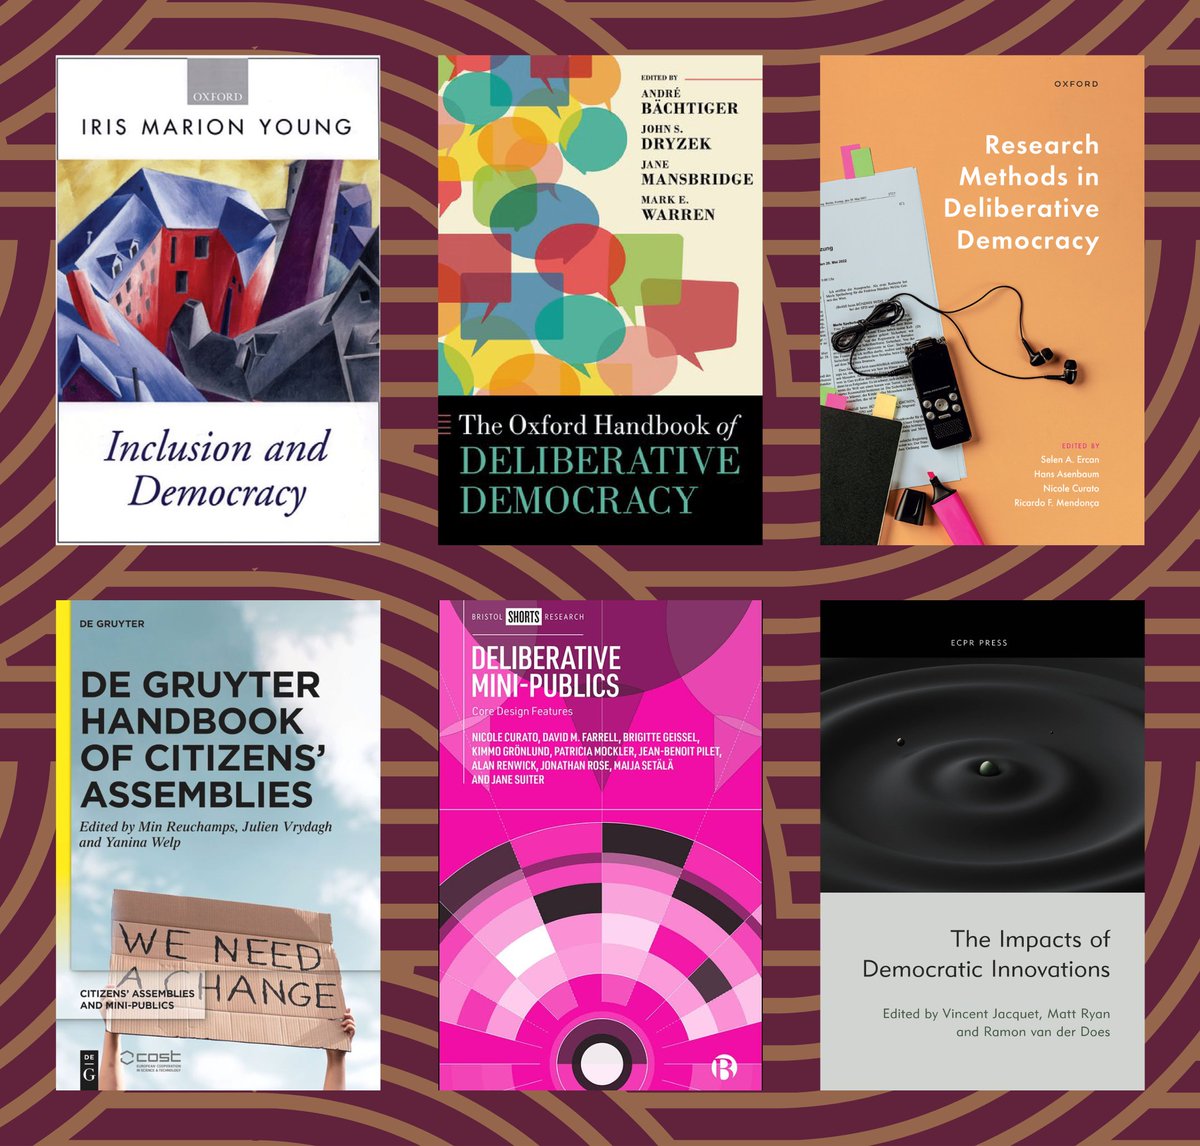 As @CREDOatSU begins South Africa’s first major research project on deliberative democracy and citizens assemblies, what’s at the top of our reading list? 📚👨‍🎓